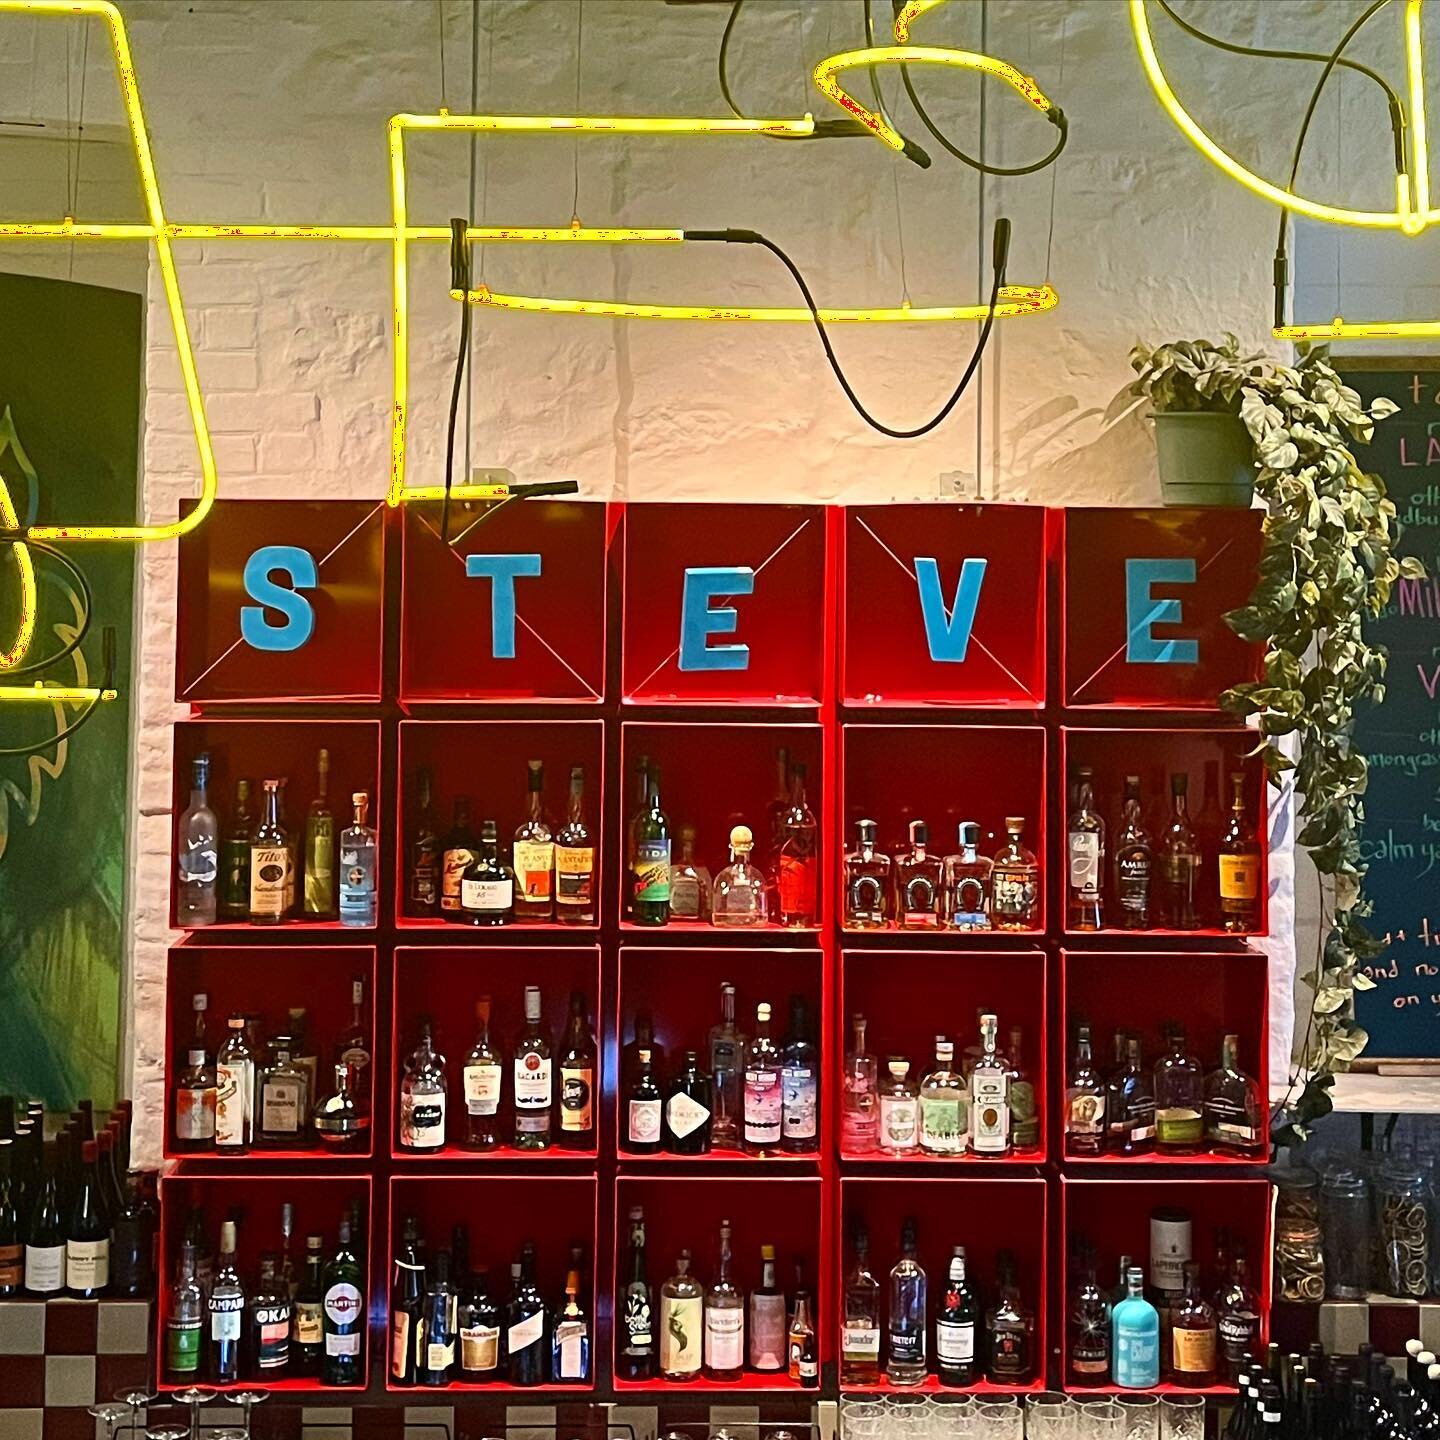 Get Steve&rsquo;d 
Open 5-late weekdays 
12-late Saturdays
See you soon freo 

#comingforyourtastebuds #freoeats #steveorelse